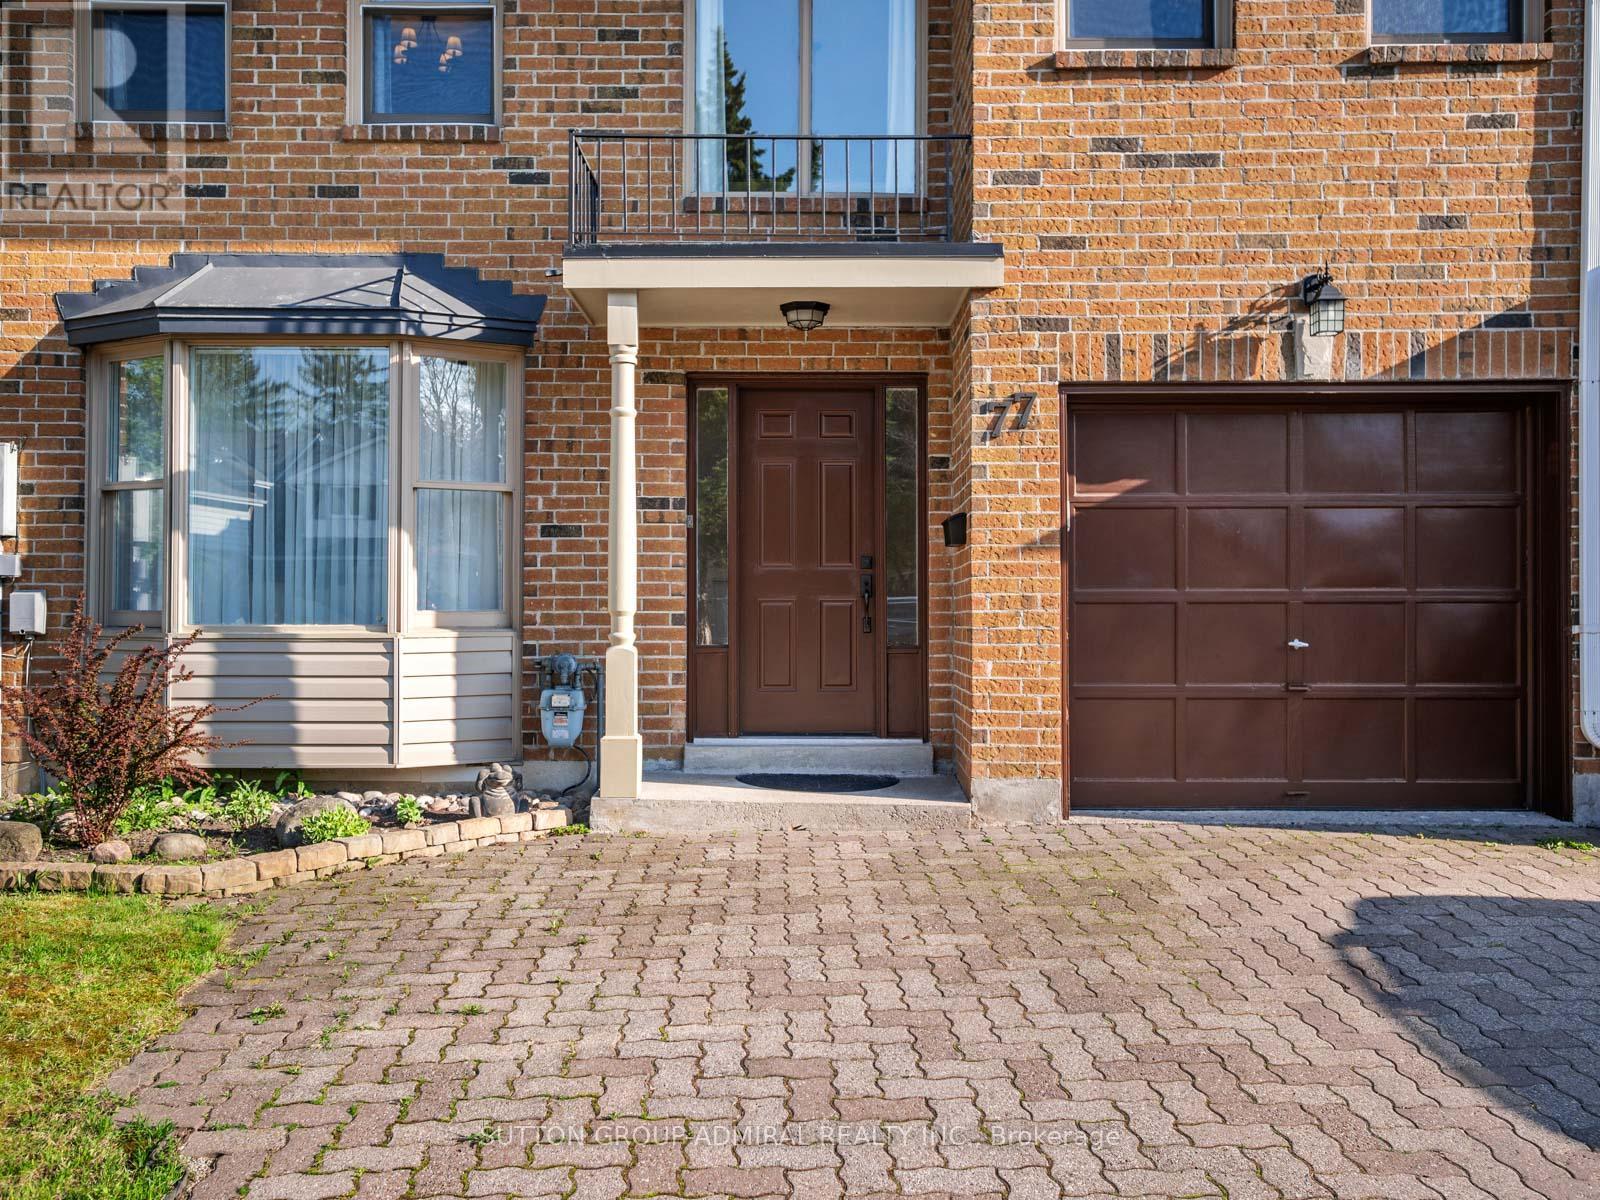 












77 CHISWELL CRESCENT

,
Toronto,




Ontario
M2N6G2

